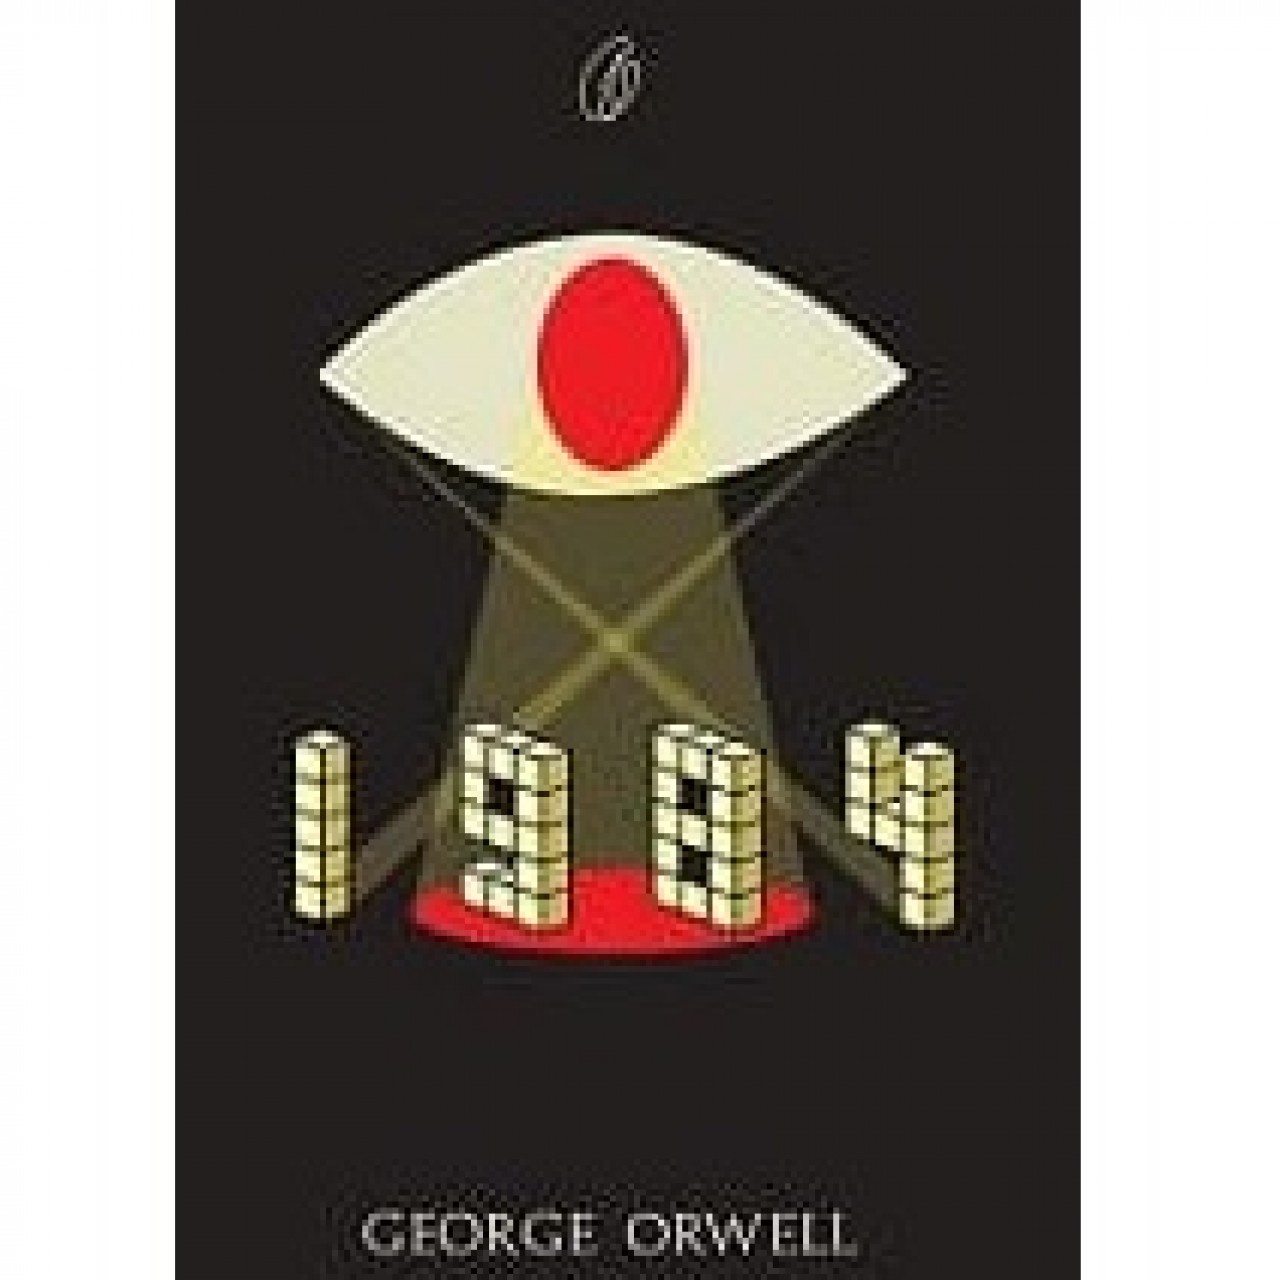 1984 By George Orwell - Paperback 2015 - Literature Book